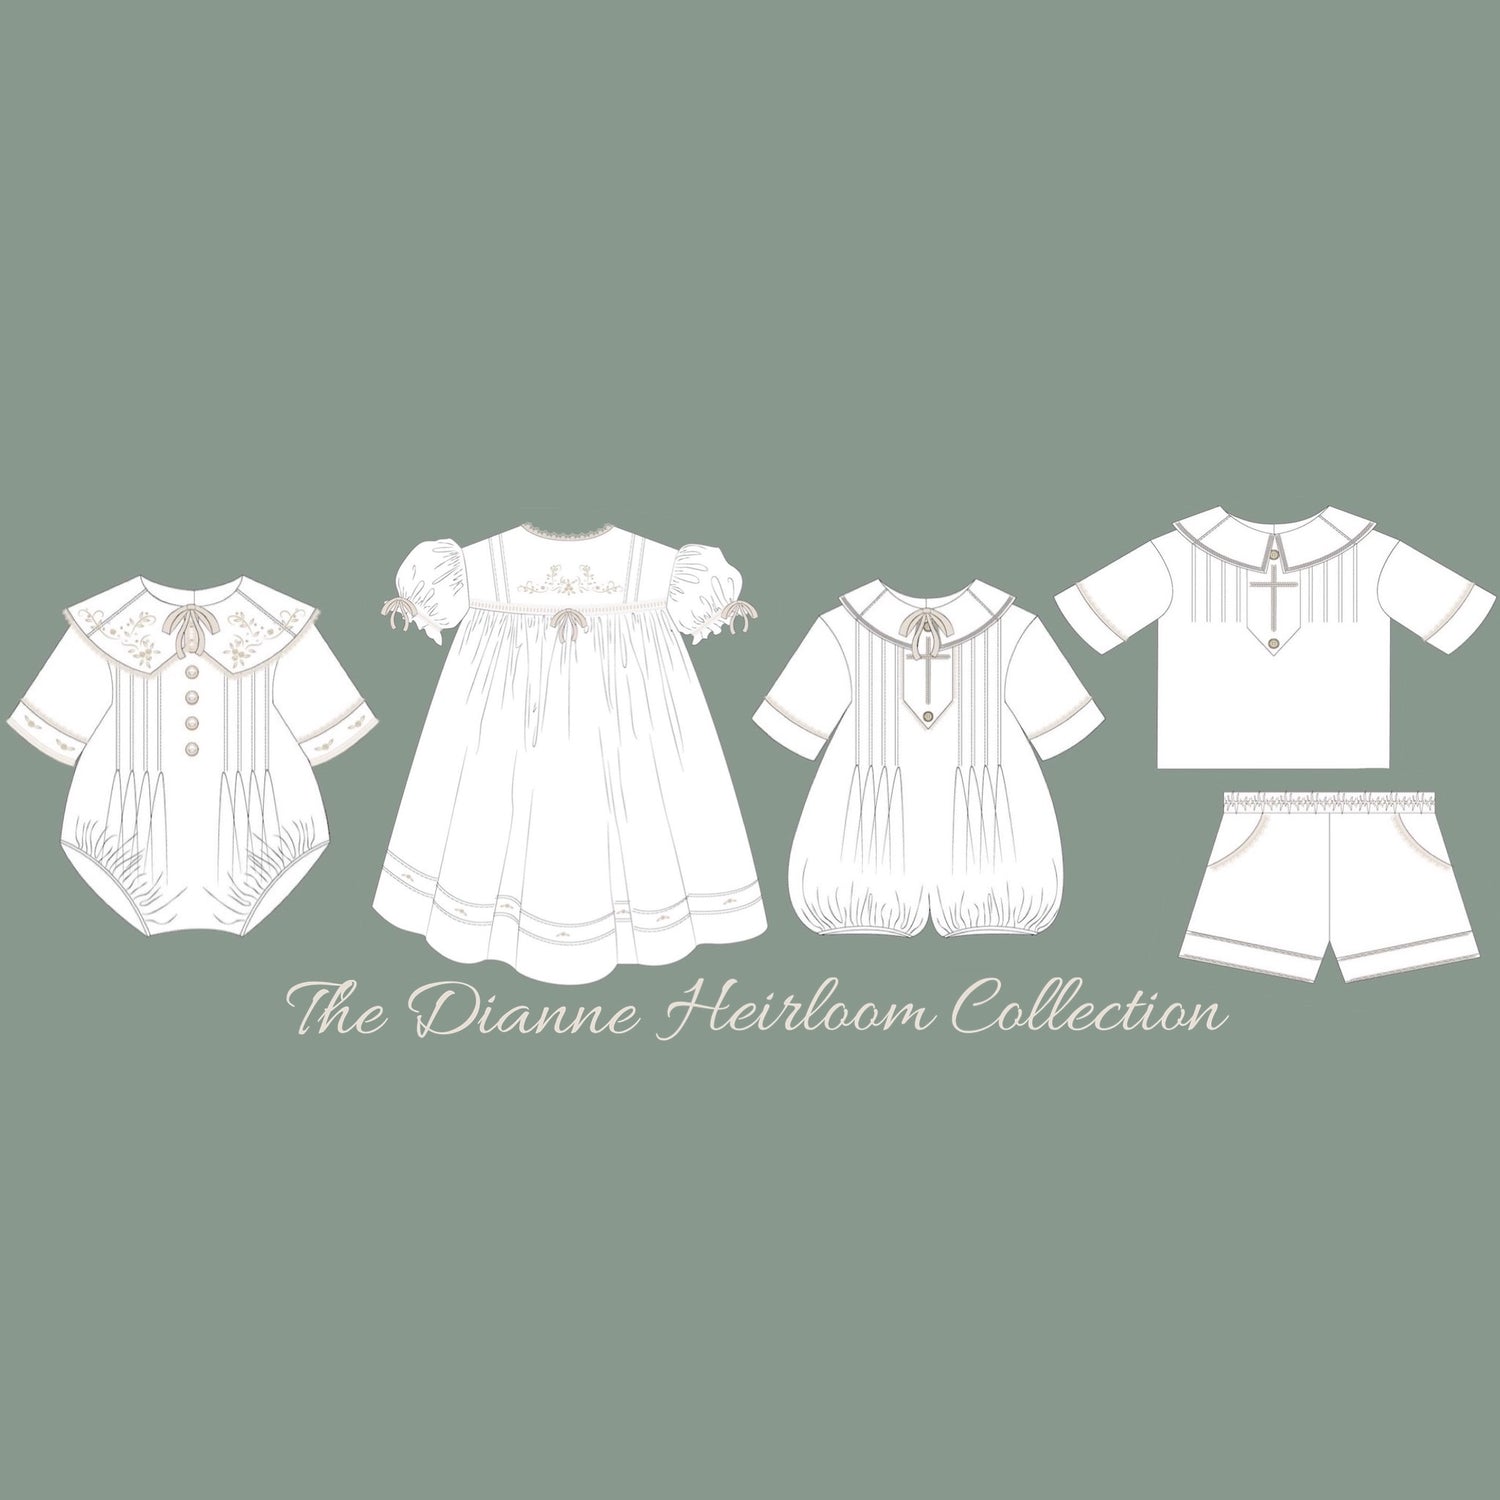 The Dianne Heirloom Collection